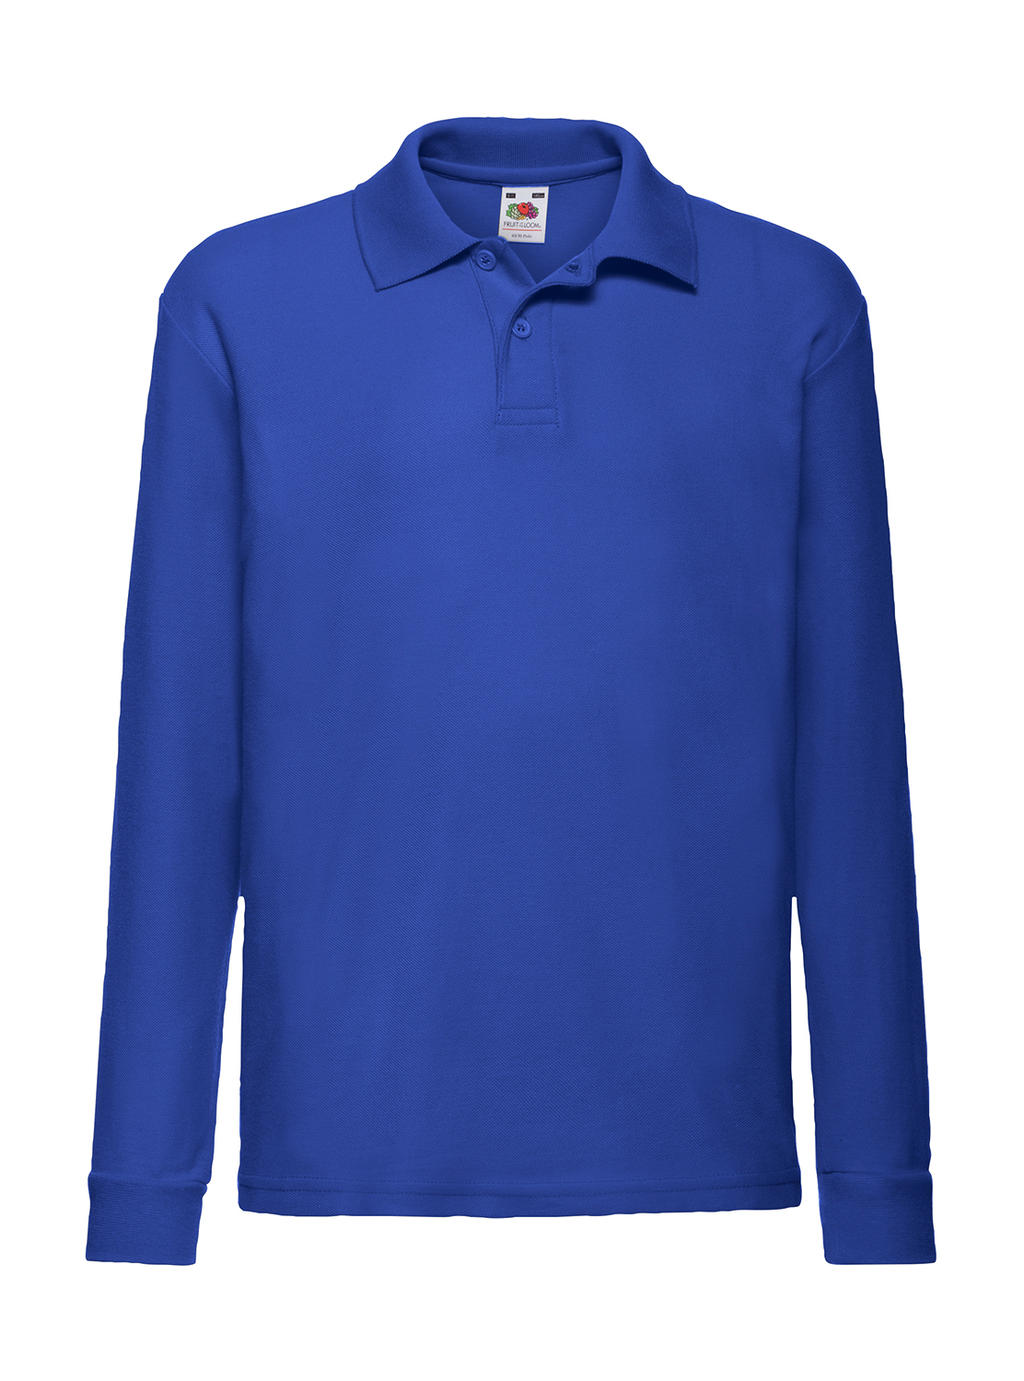  Kids 65/35 Long Sleeve Polo in Farbe Royal